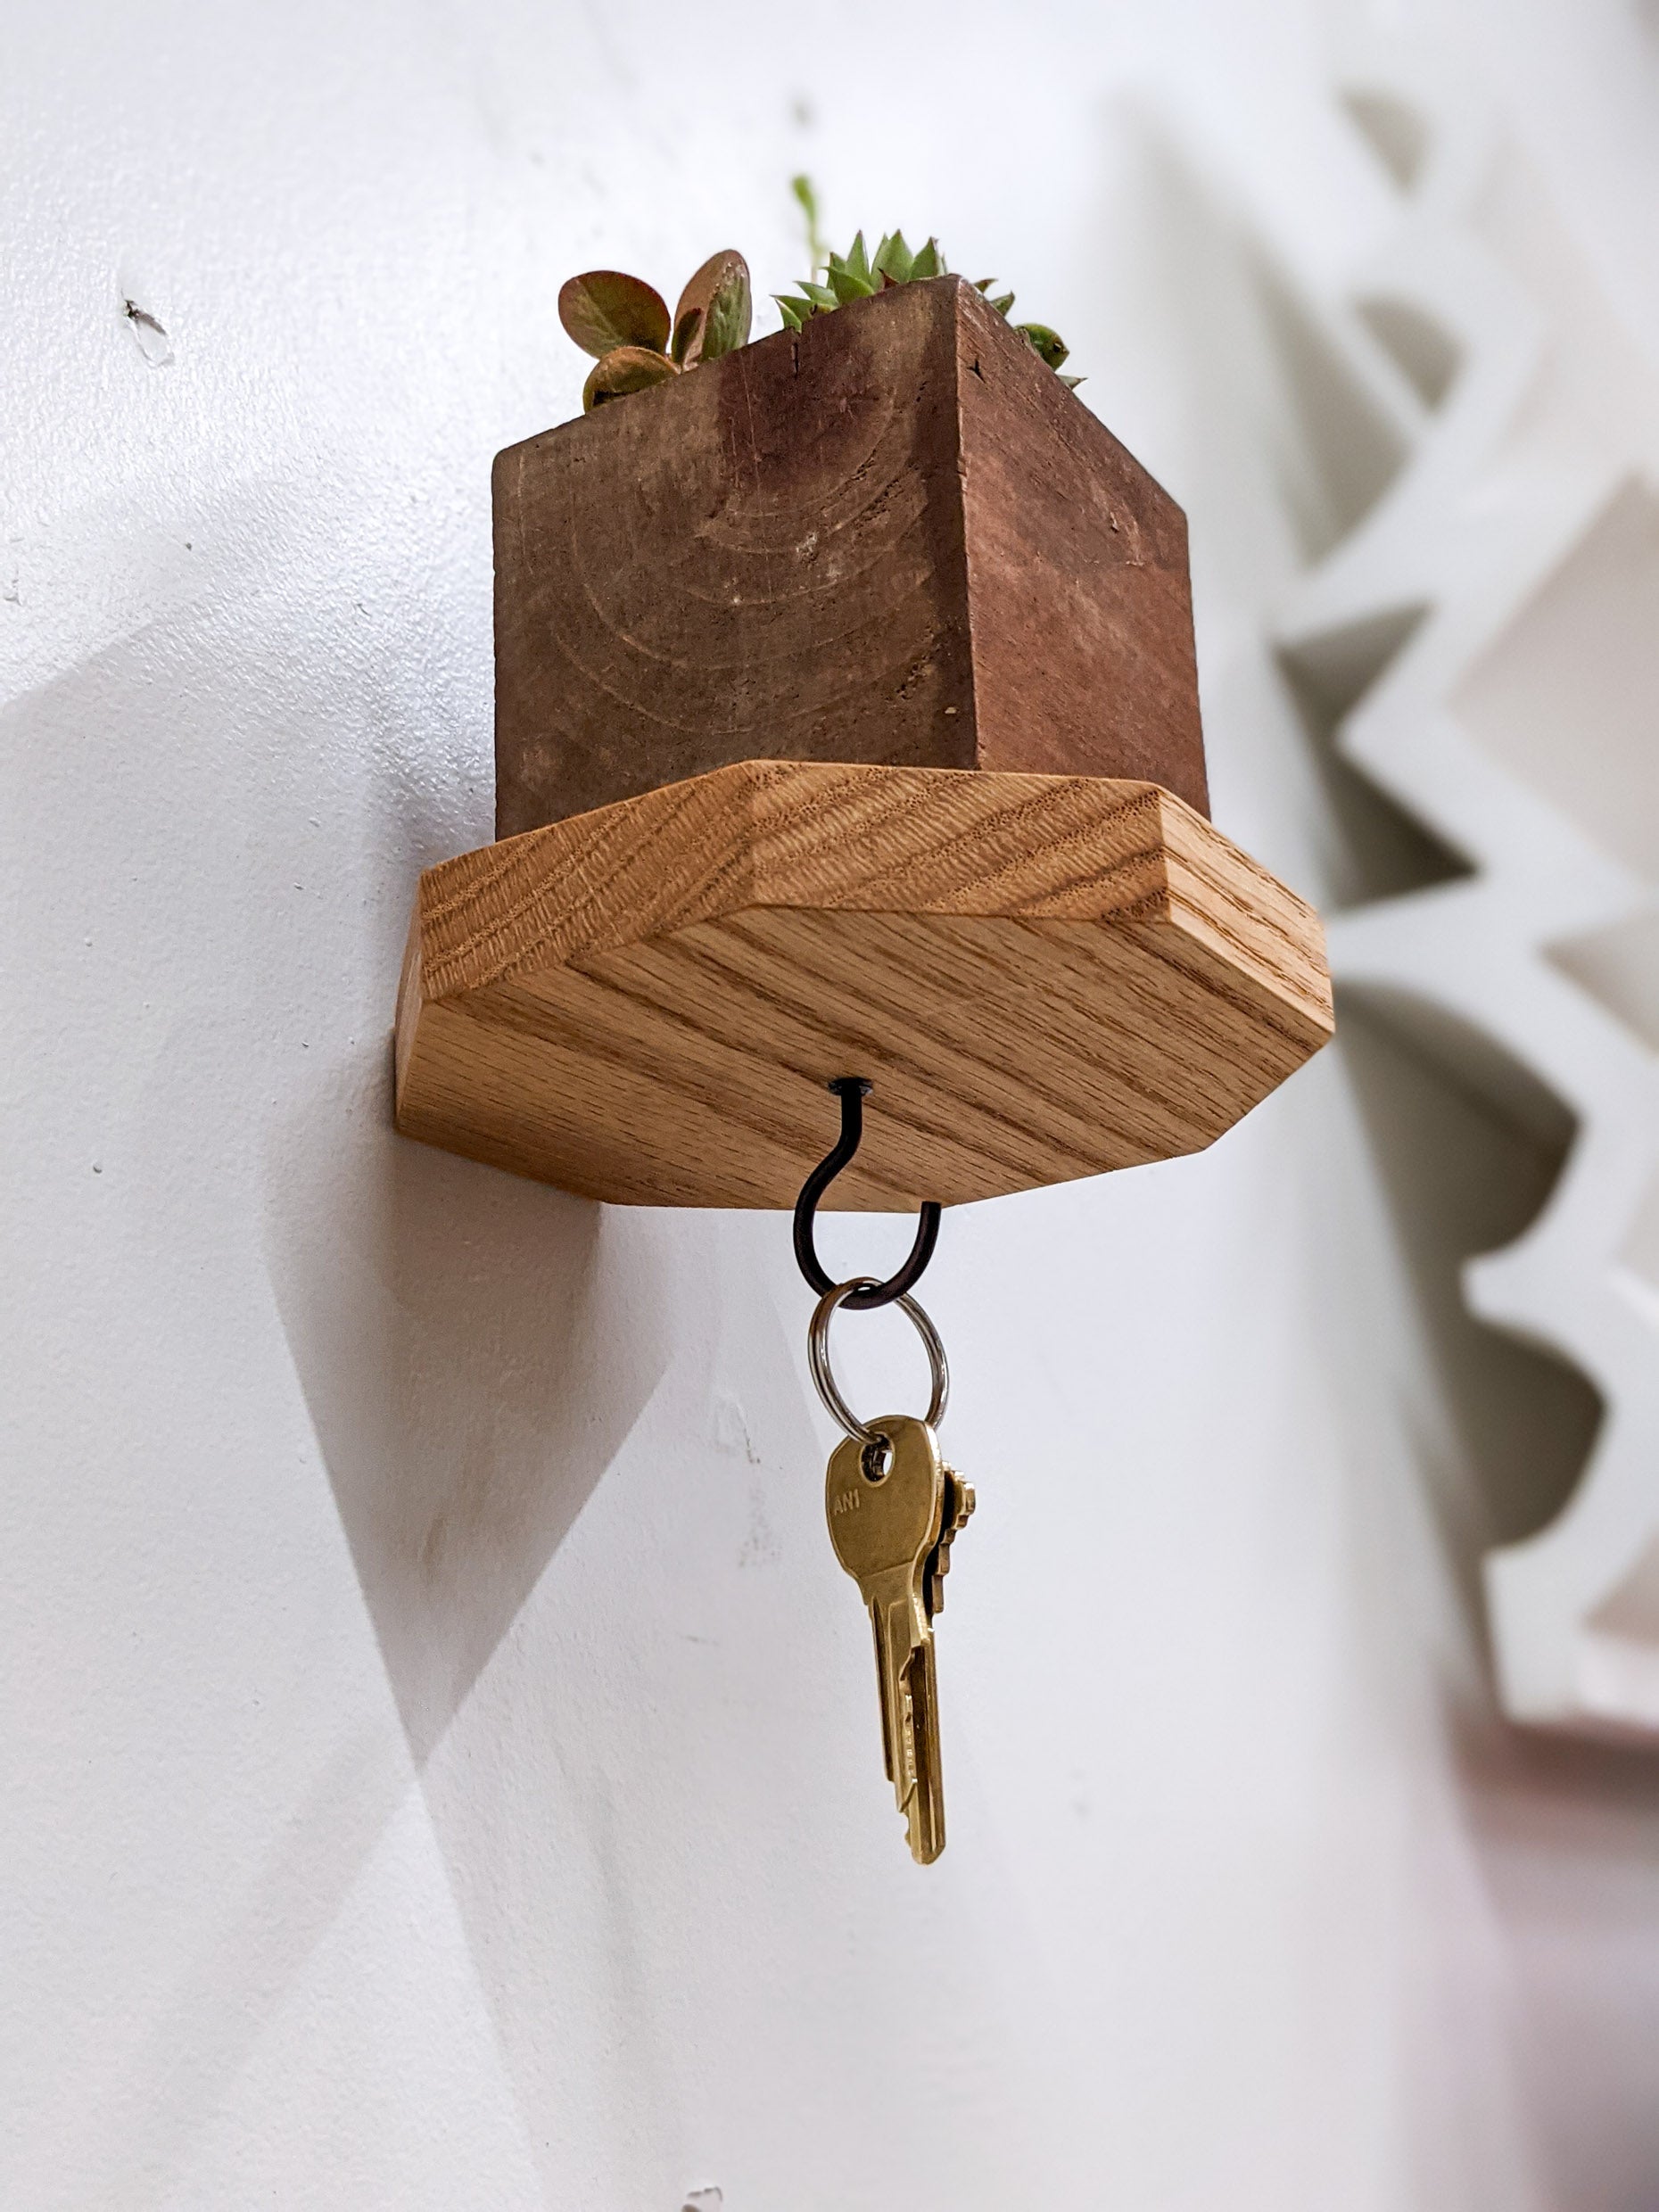 The bottom view of a wall mounted oak octagon key hook shelf. A black hook extends out from the bottom of the shelf and curves upward, perfectly creating a notch for keys of all sizes to be hung. Two bronze keys dangle from the hook. We see the sides of a square planter that is filled with succulents. 